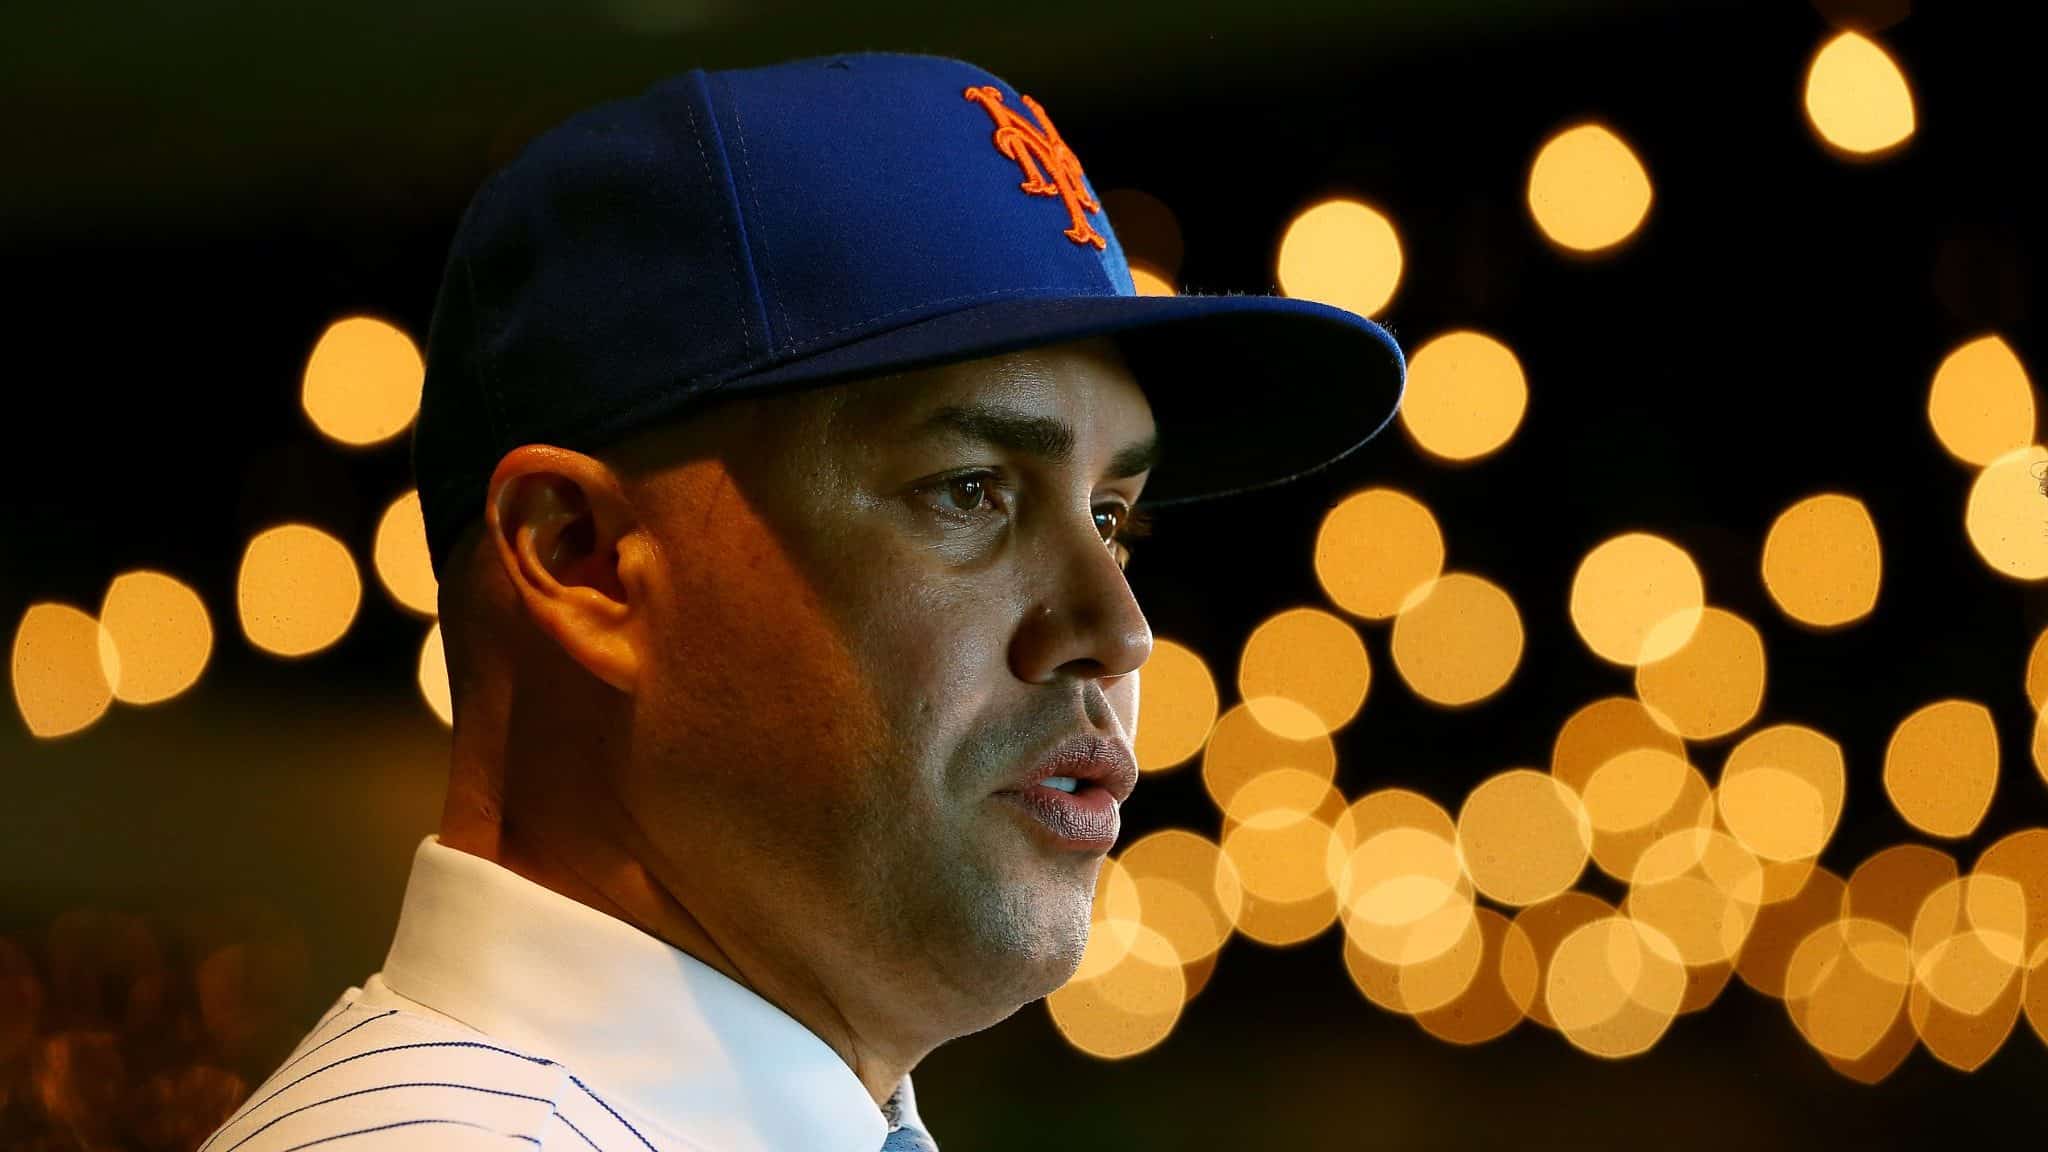 NEW YORK, NY - NOVEMBER 04: Carlos Beltran talks to the media after being introduced by as the manager of the New York Mets during a press conference at Citi Field on November 4, 2019 in New York City.